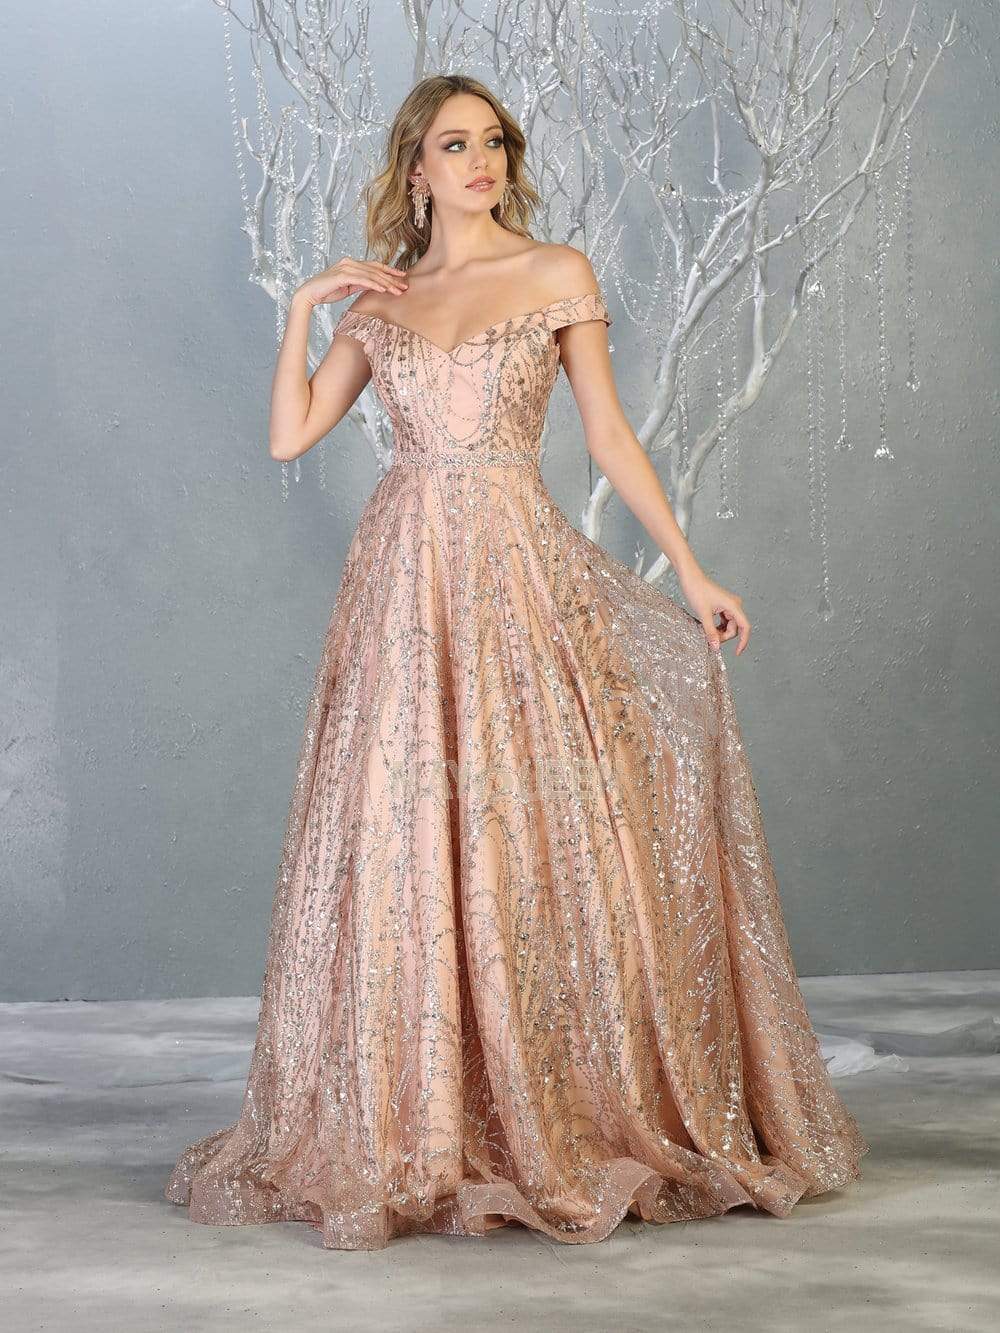 May Queen - MQ1703 Off Shoulder Glitter Motif A-Line Gown Prom Dresses 4 / Rose Gold